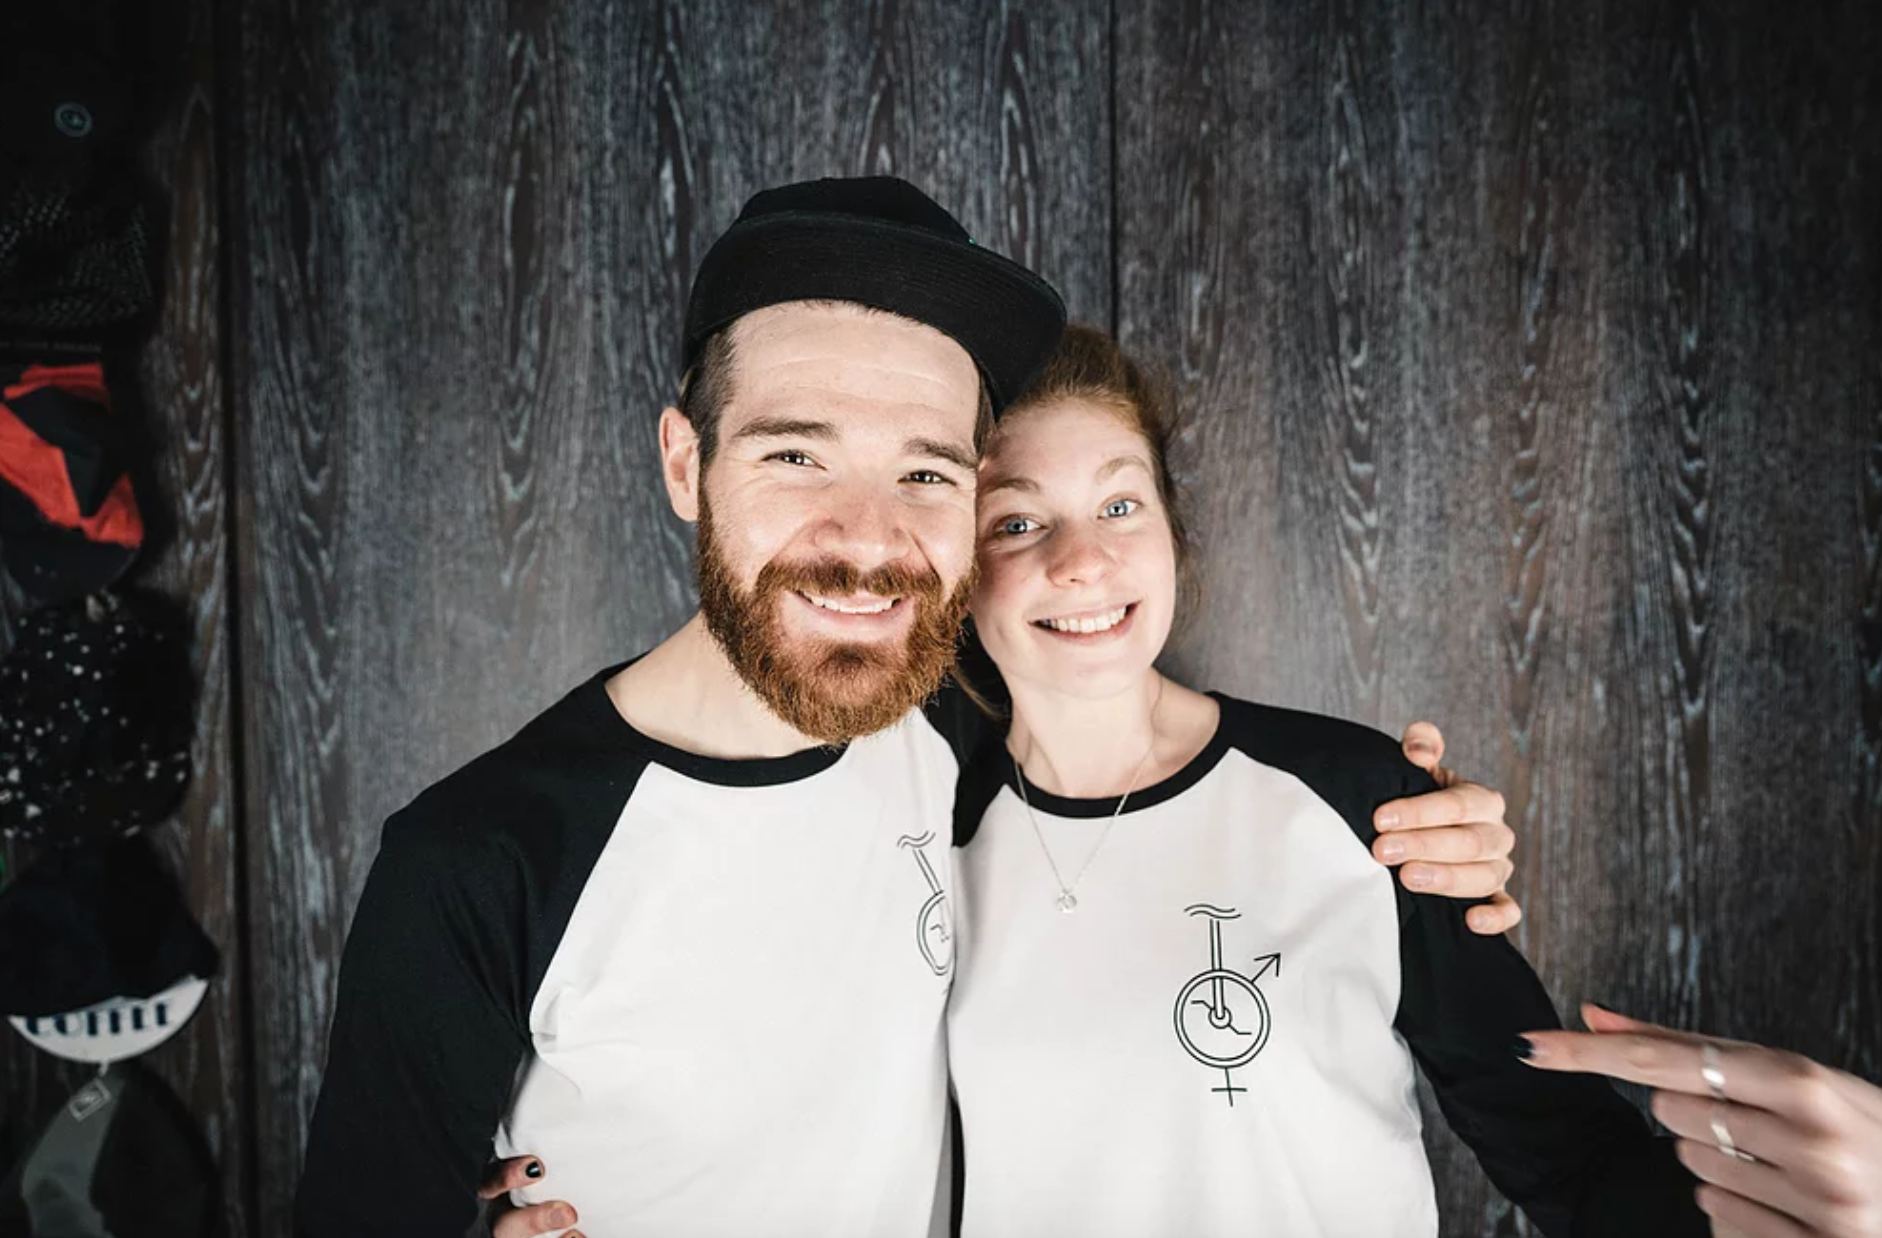 Unicycle black and white baseball t-shirt worn by two happy JAM employees